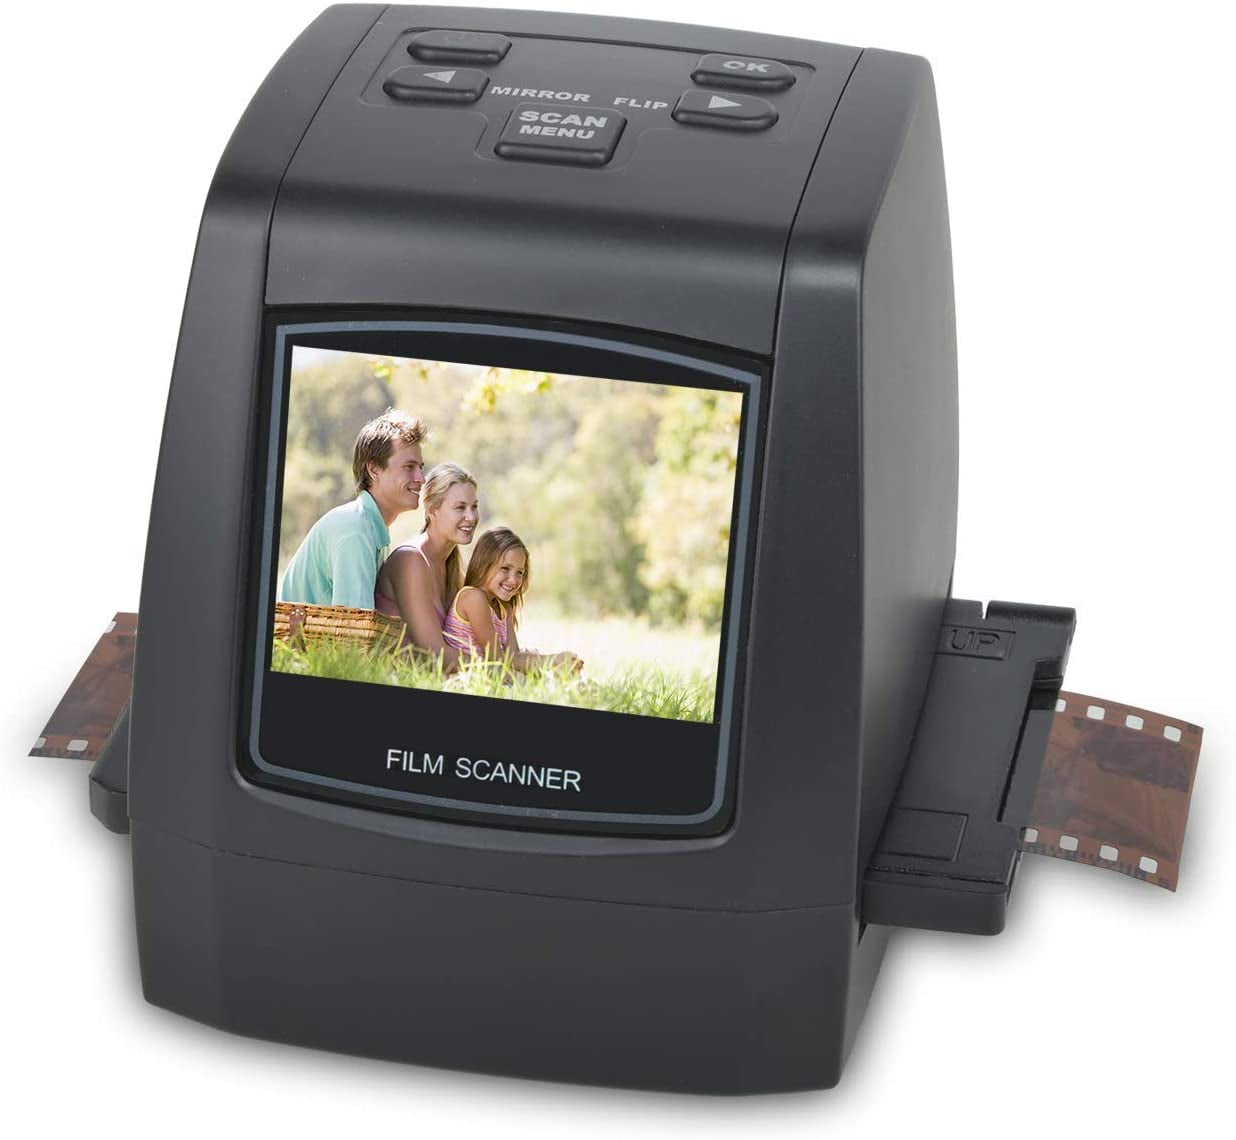 Celebrity spade Hound DIGITNOW Film Scanners with 22MP Converts 126 KPK/135/110/Super 8 Films,  Slides & Negatives All in One into Digital Photos, 2.4" LCD Screen,  Impressive 128MB Built-in Memory - Walmart.com